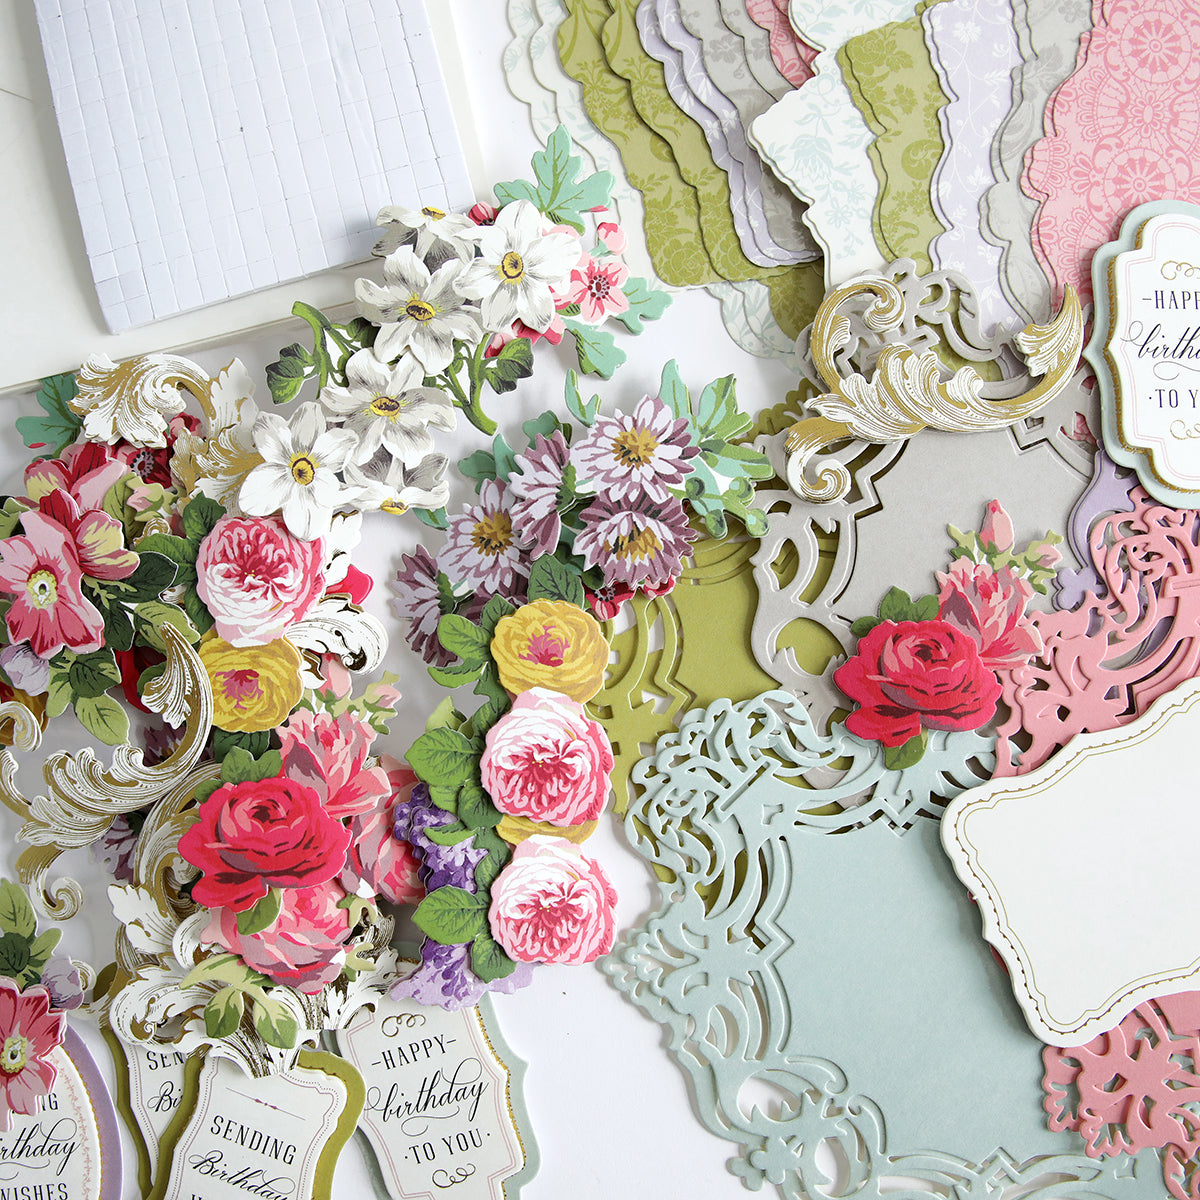 A collection of handcrafted paper cut outs and flowers on a table, showcasing a stunning Simply Birthday Easel Card Making Kit perfect for cardmaking enthusiasts wanting to create unique and beautiful handmade cards.